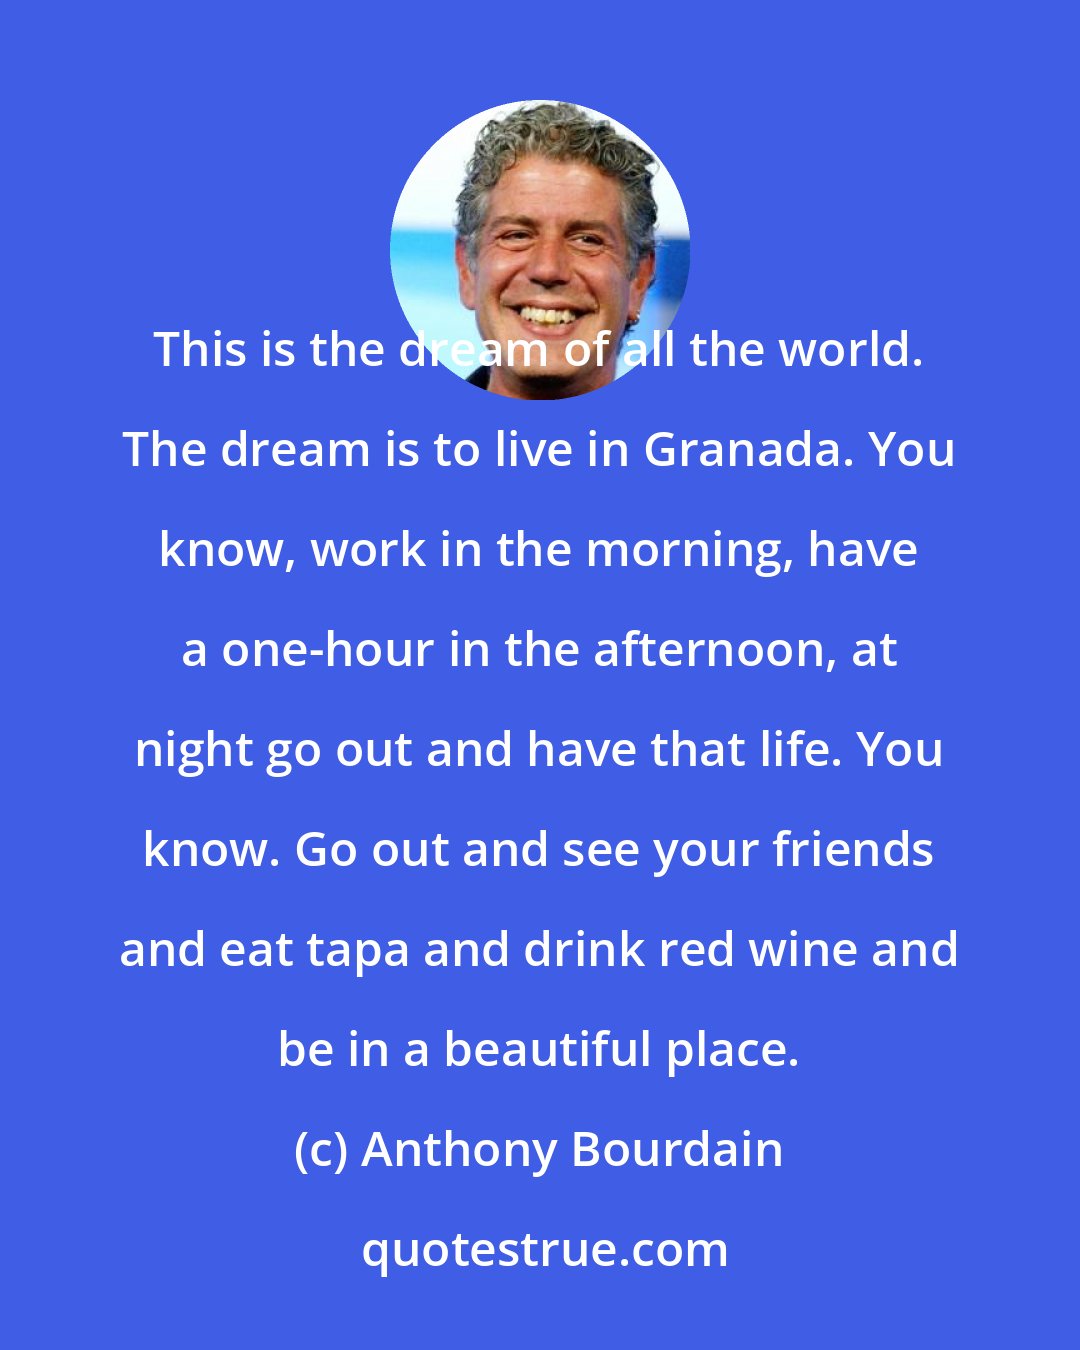 Anthony Bourdain: This is the dream of all the world. The dream is to live in Granada. You know, work in the morning, have a one-hour in the afternoon, at night go out and have that life. You know. Go out and see your friends and eat tapa and drink red wine and be in a beautiful place.